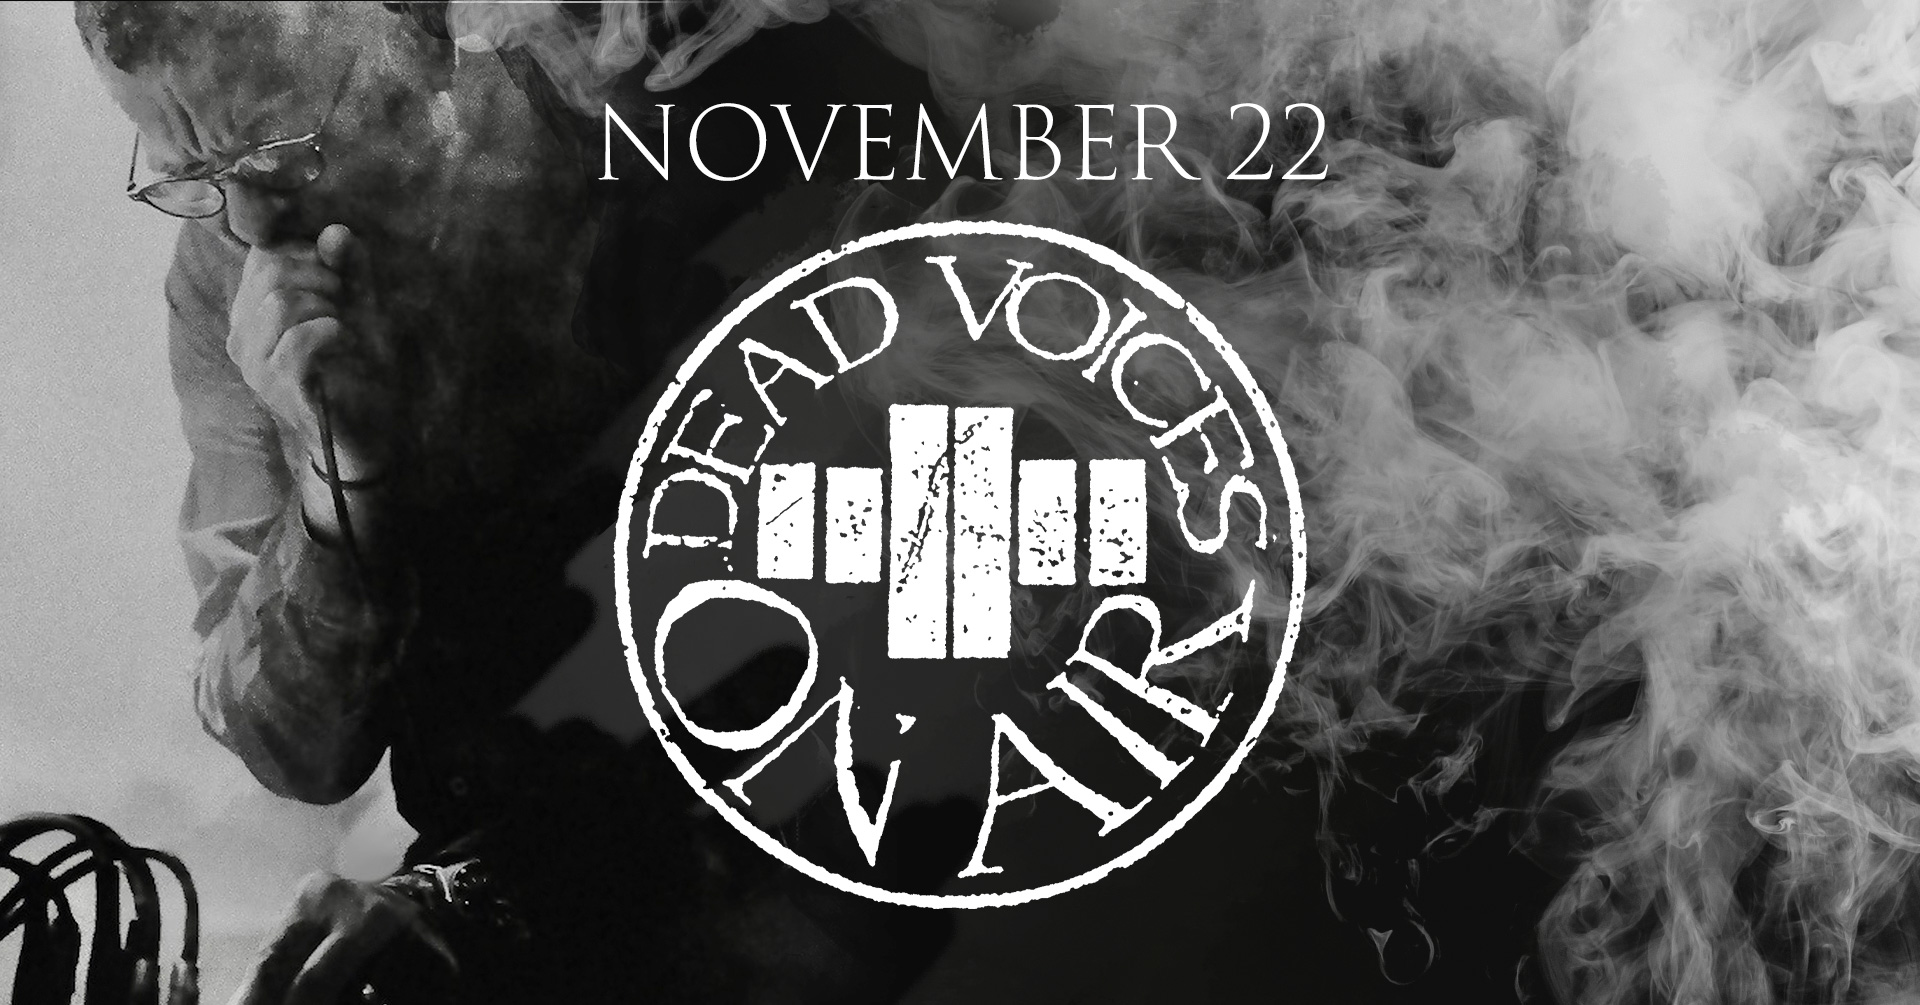 DEAD VOICES ON AIR w/Future Ghosts and Steve Marsh